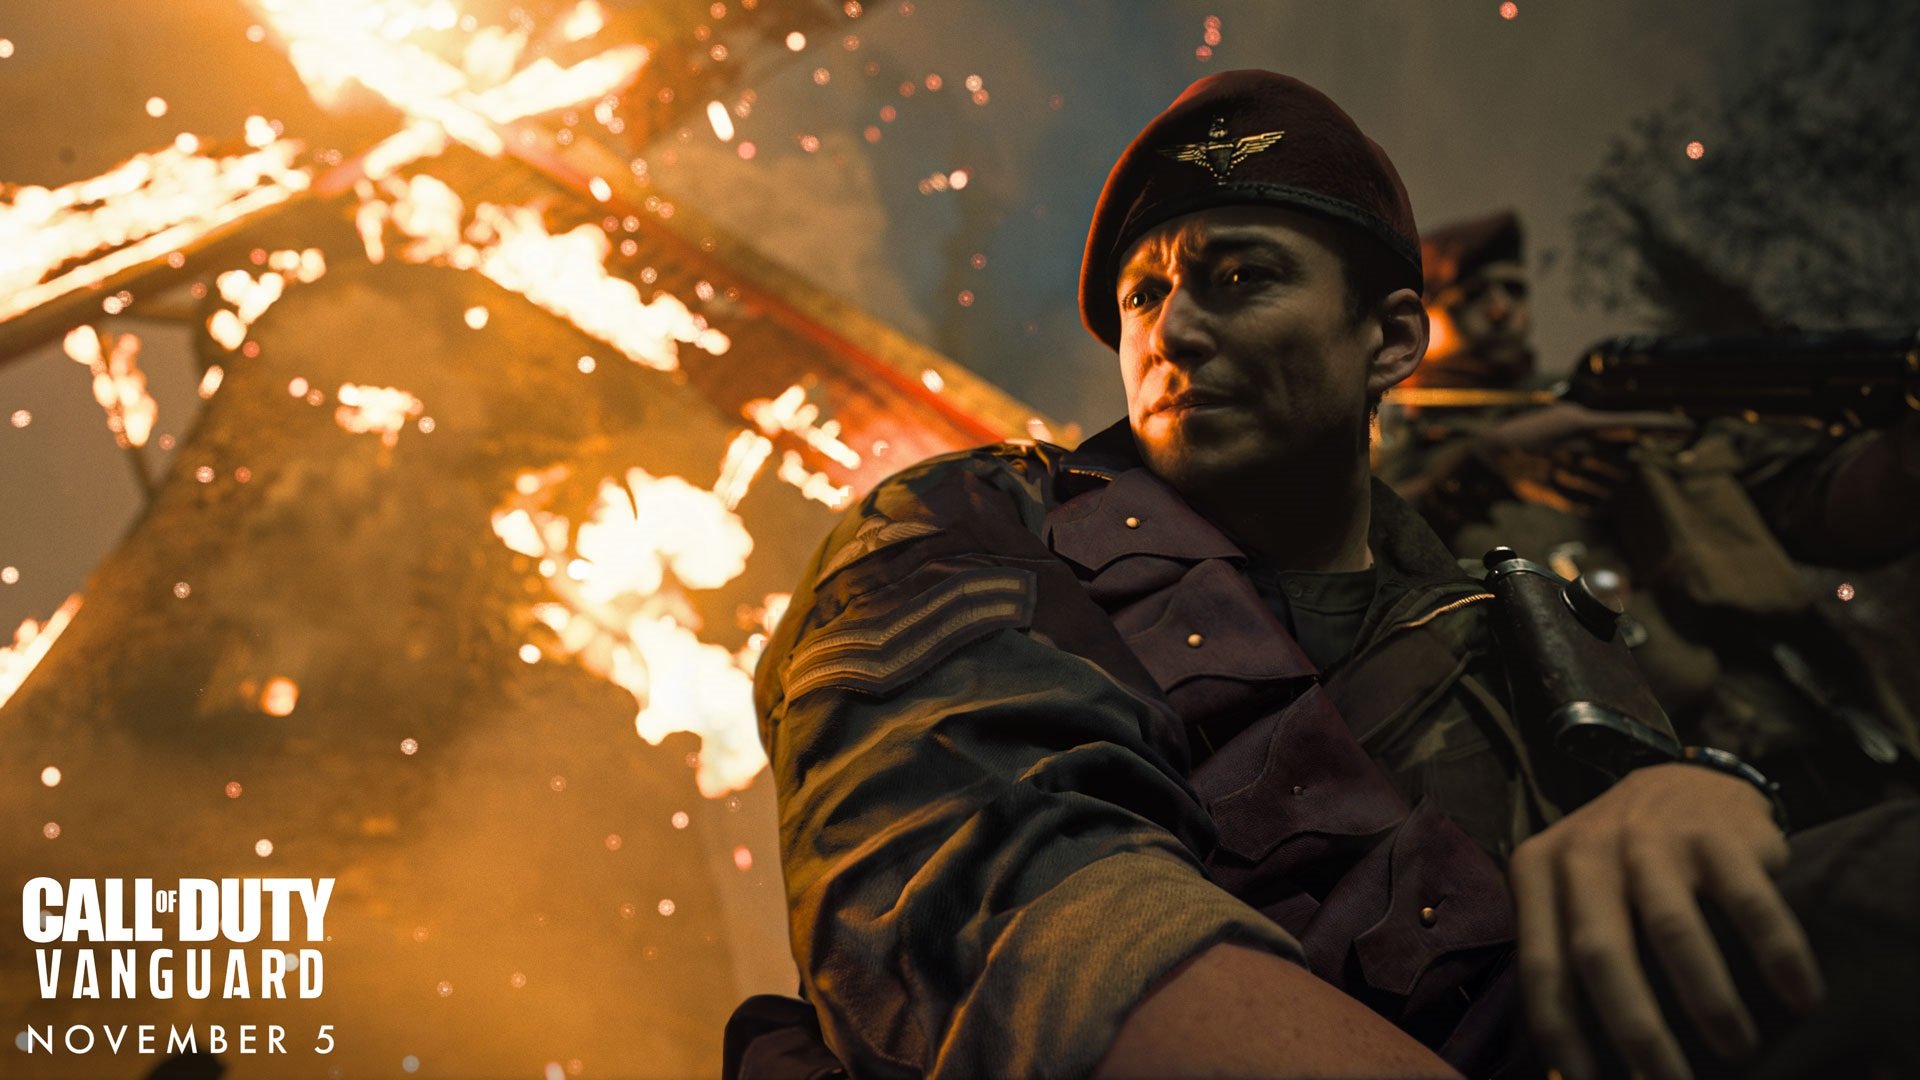 Call of Duty WW2: Vanguard is the next big game in the series